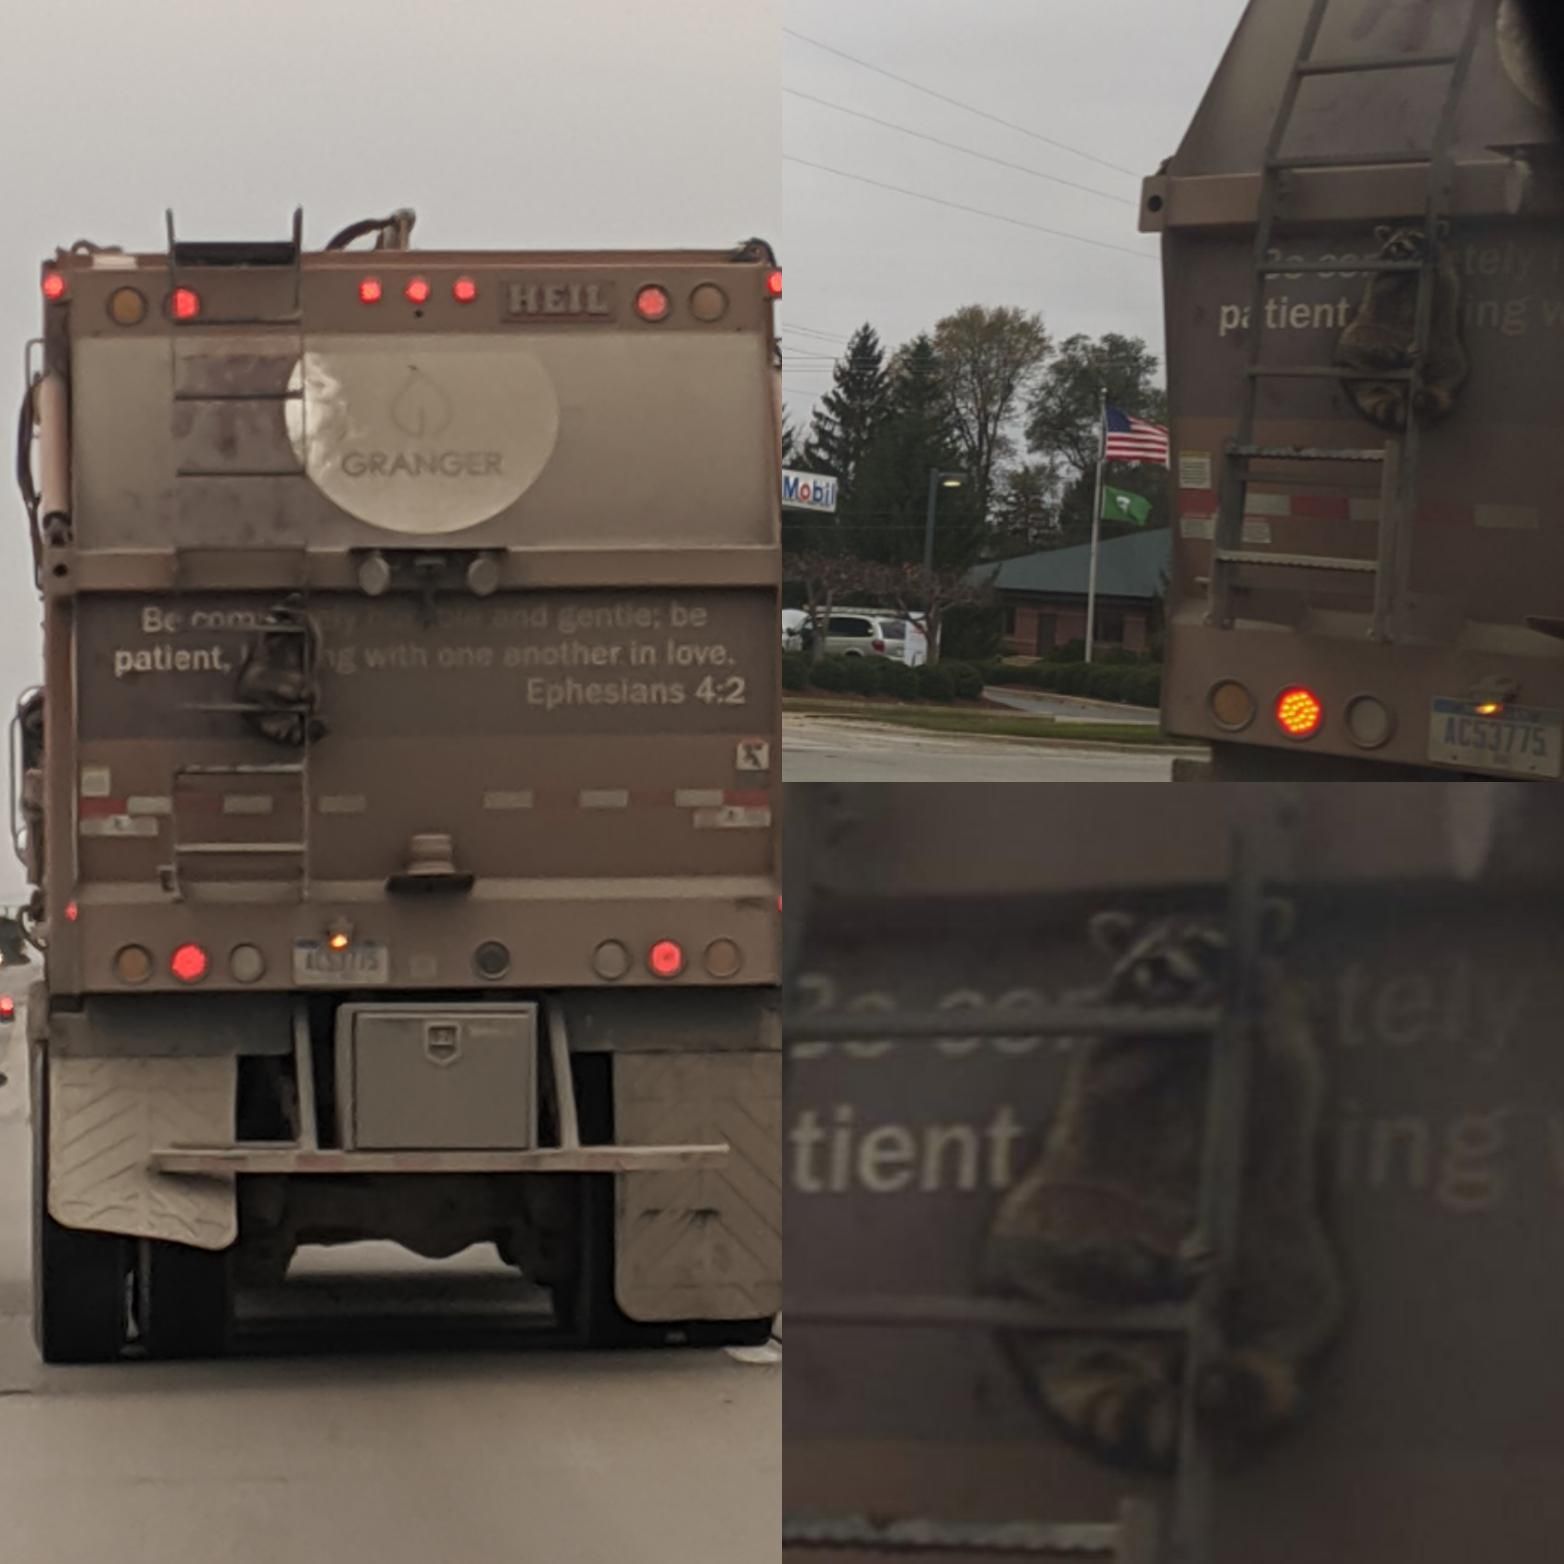 Drove behind this garbage truck today and noticed someone using it as an uber.